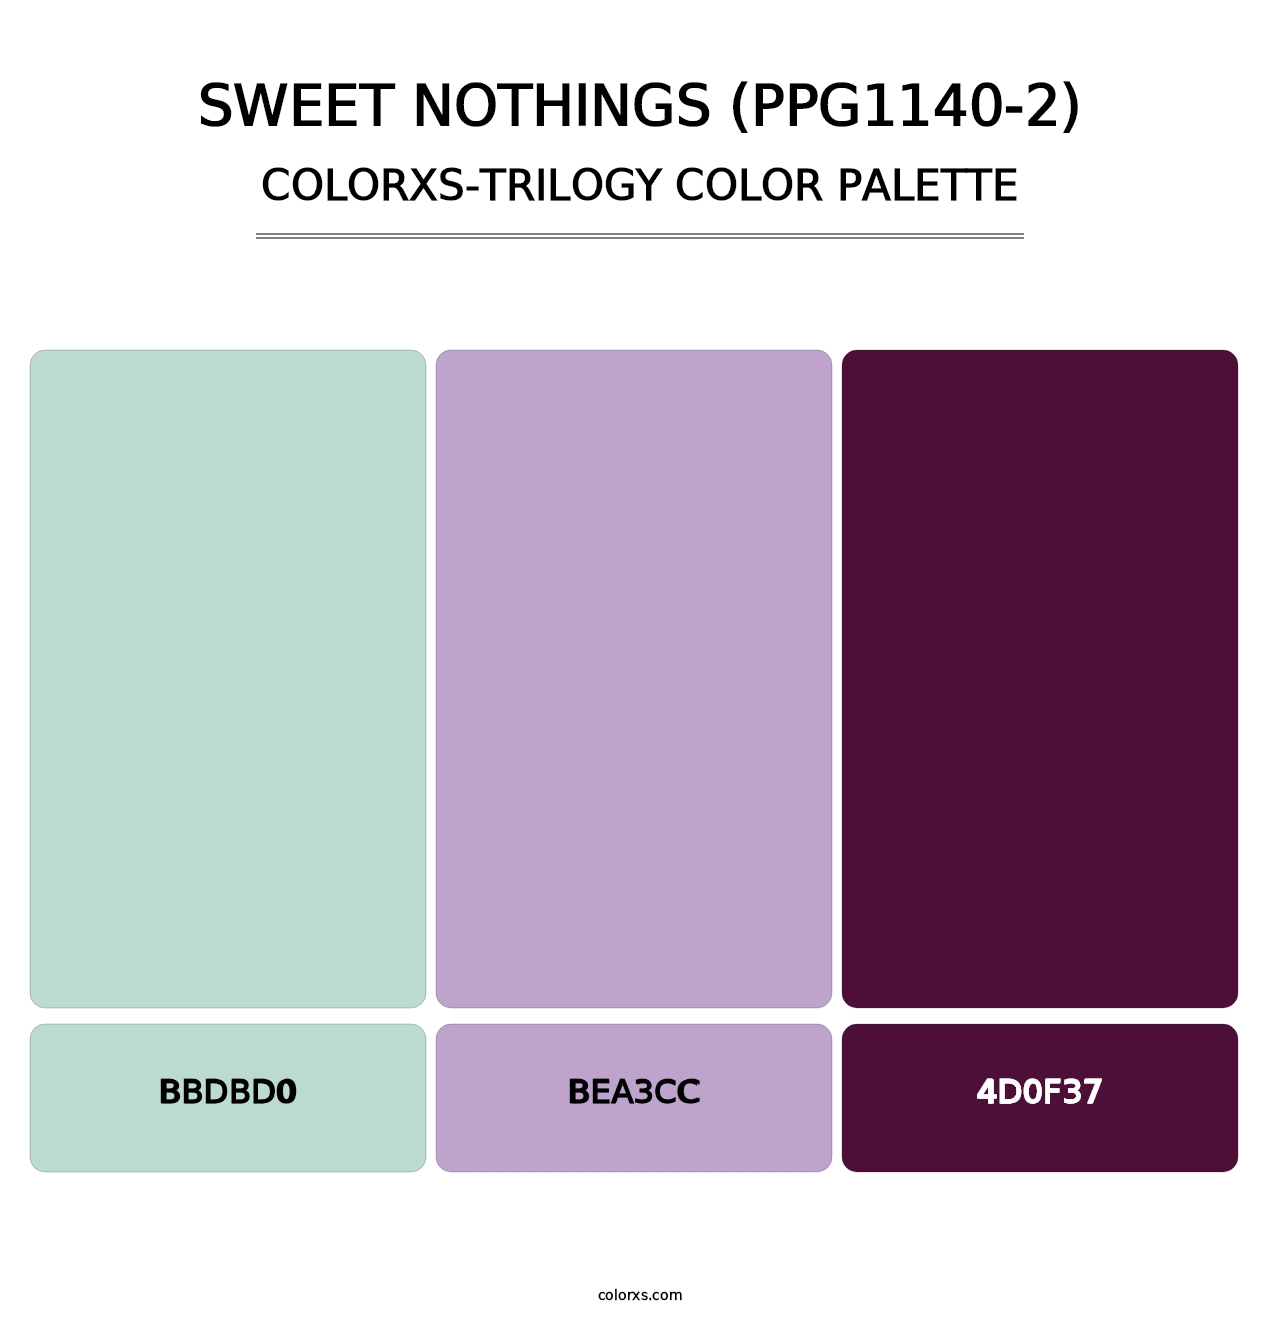 Sweet Nothings (PPG1140-2) - Colorxs Trilogy Palette